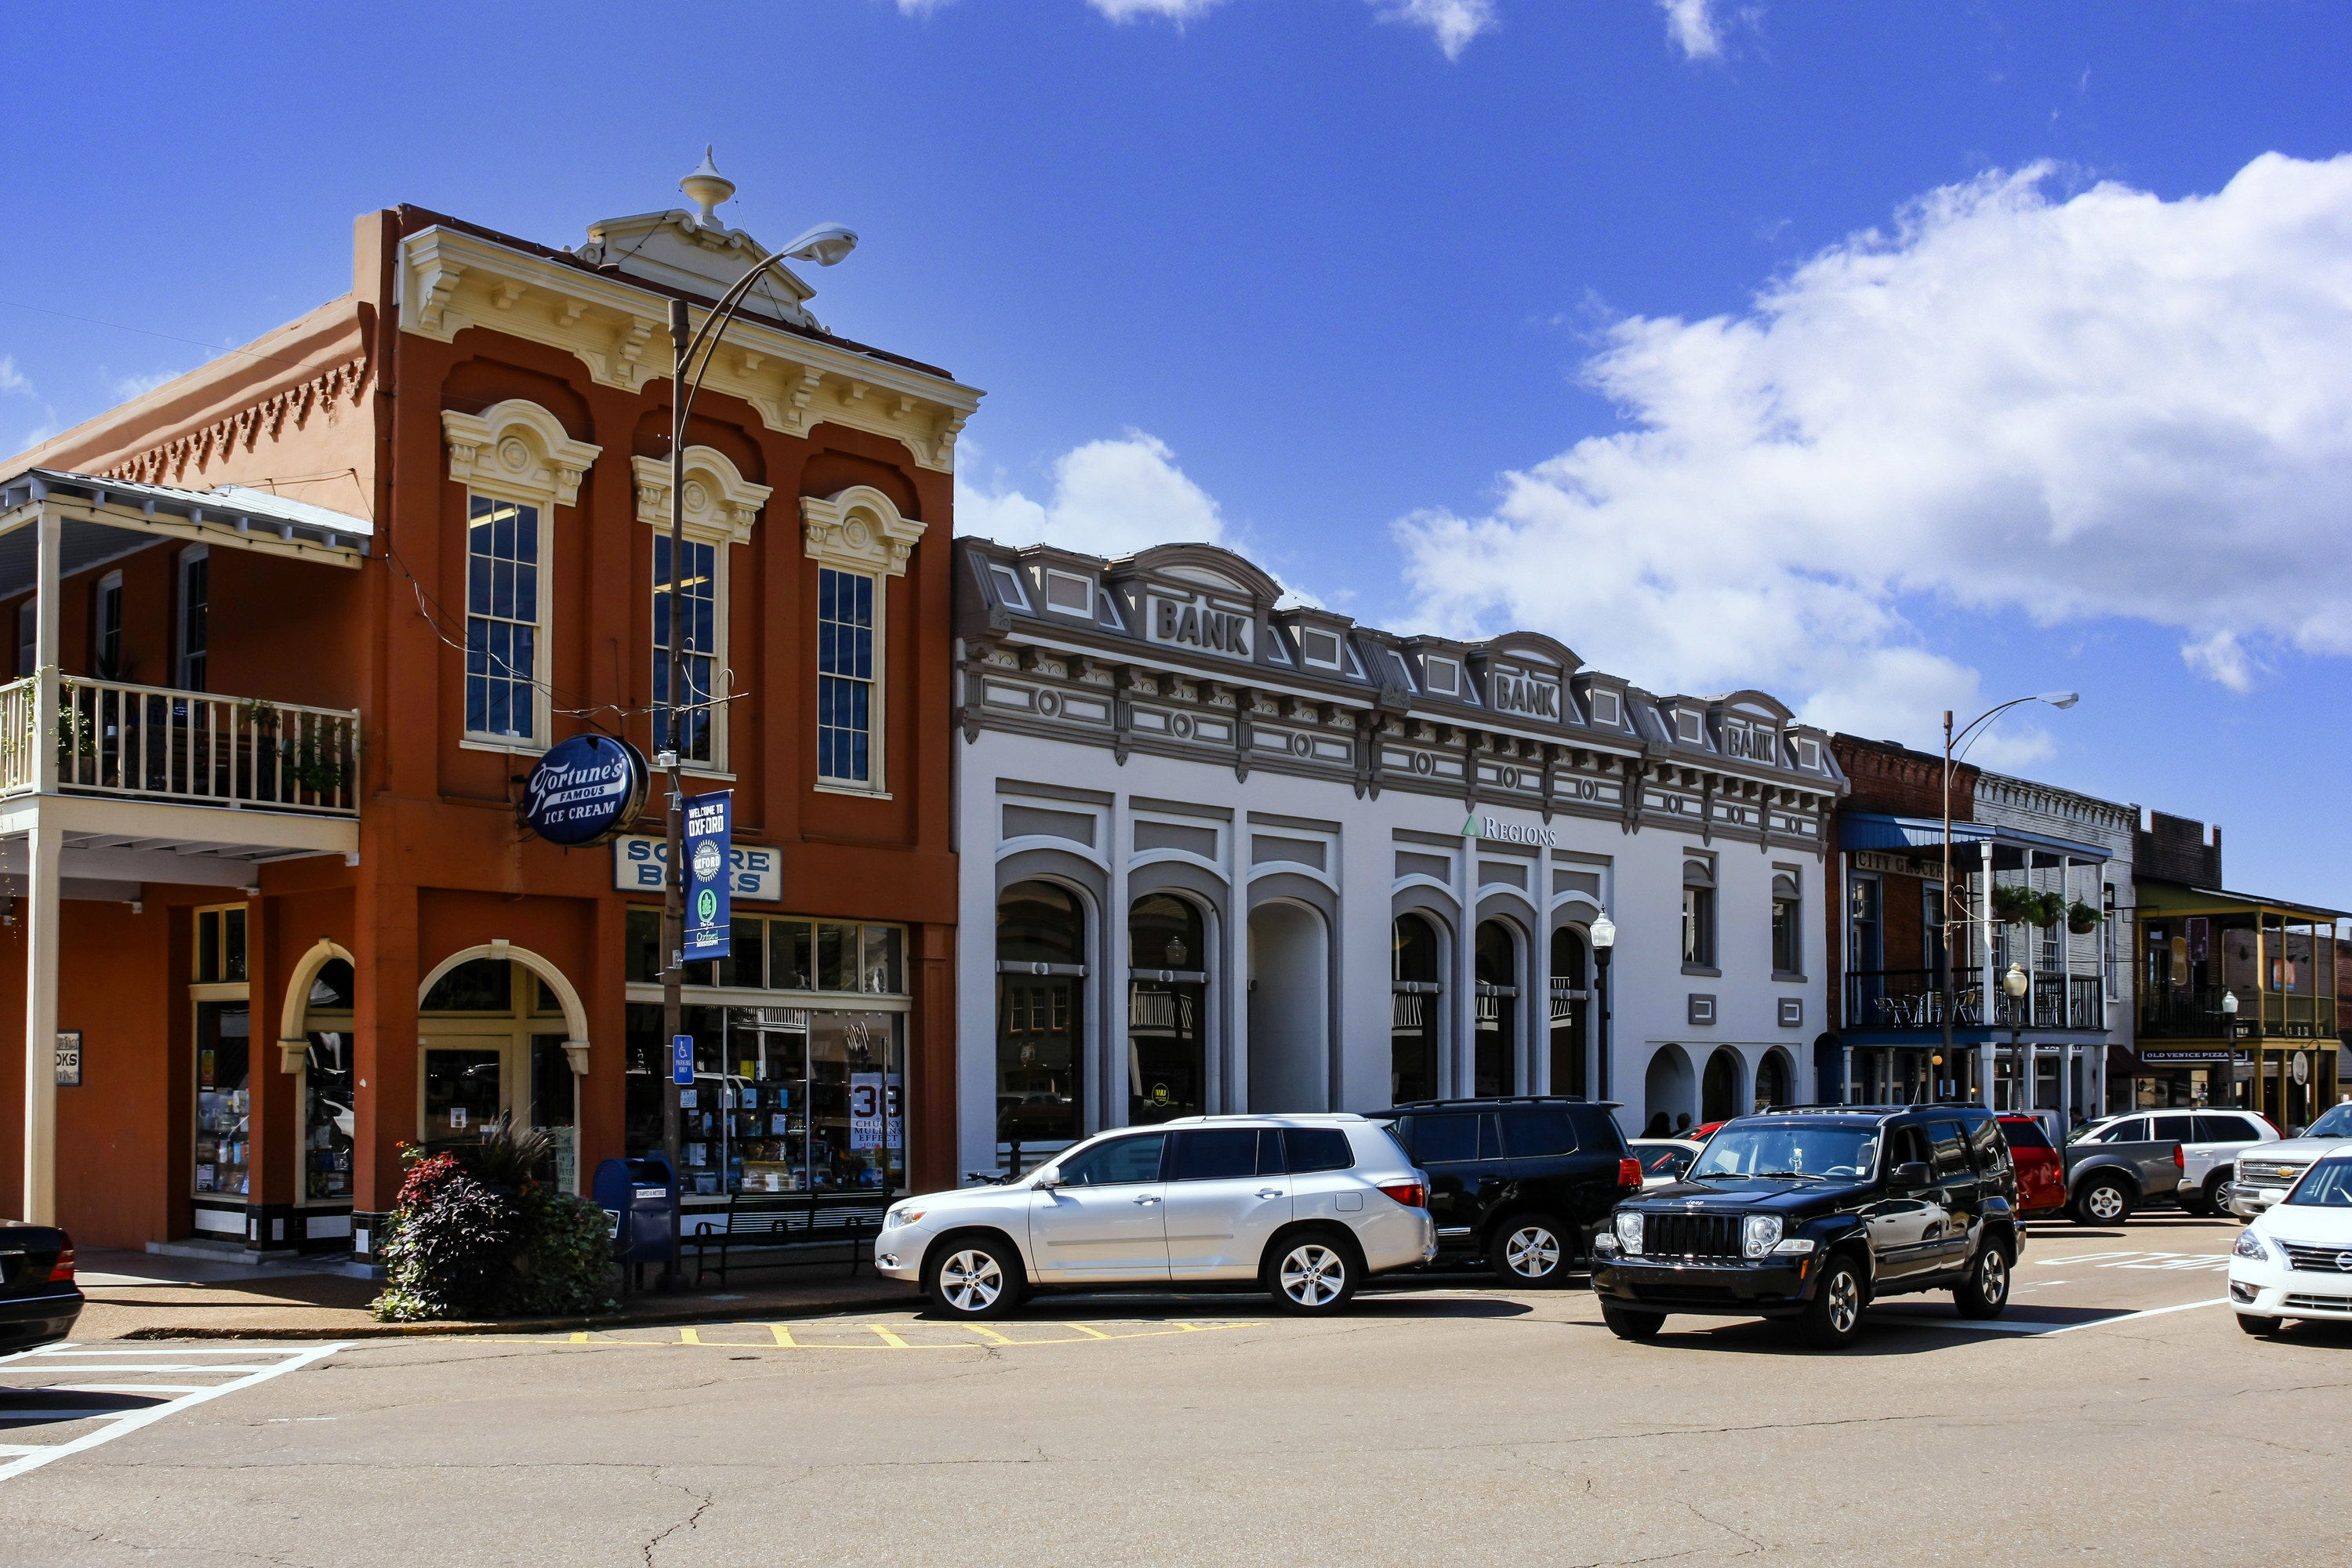 The quaint southern city square in Oxford Mississippi, USA